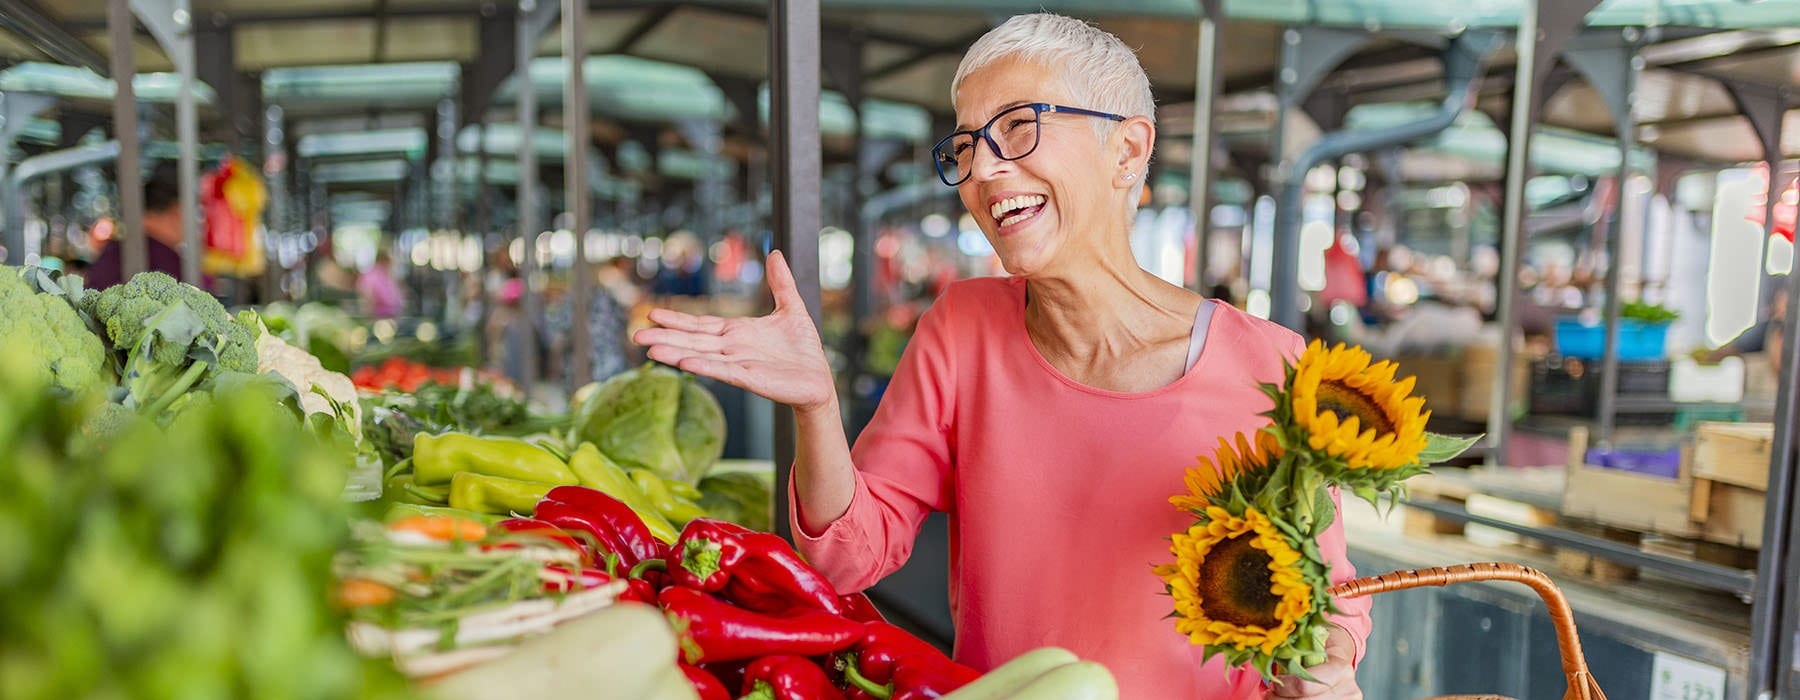 A women smiling while shopping at a large farmers market